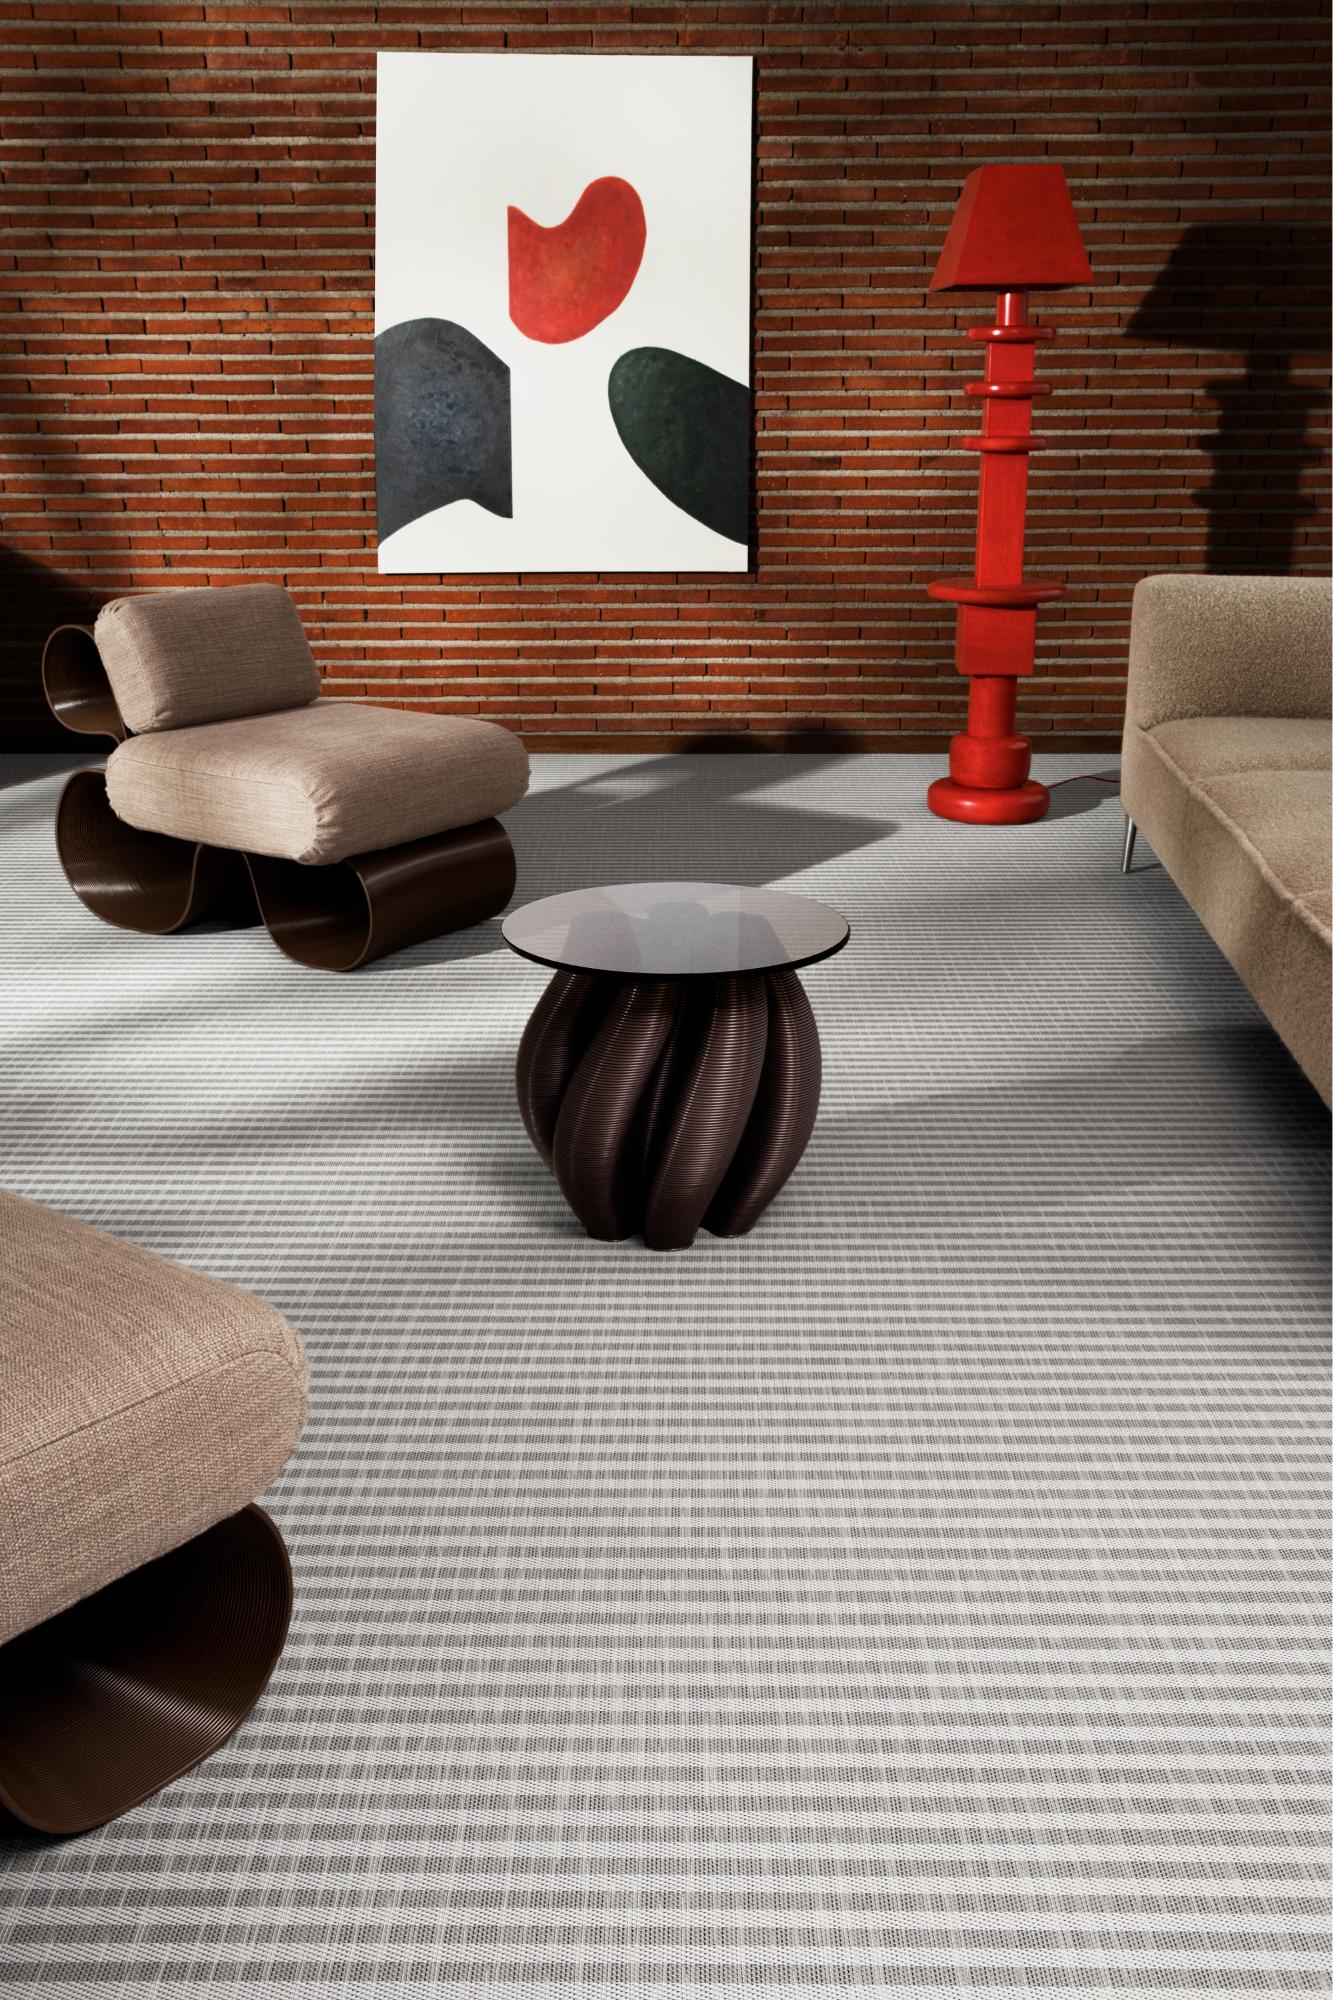 Graphic, Bolon’s Graphic: Timeless Classics for Any Space, a Collection That Stands the Test of Time